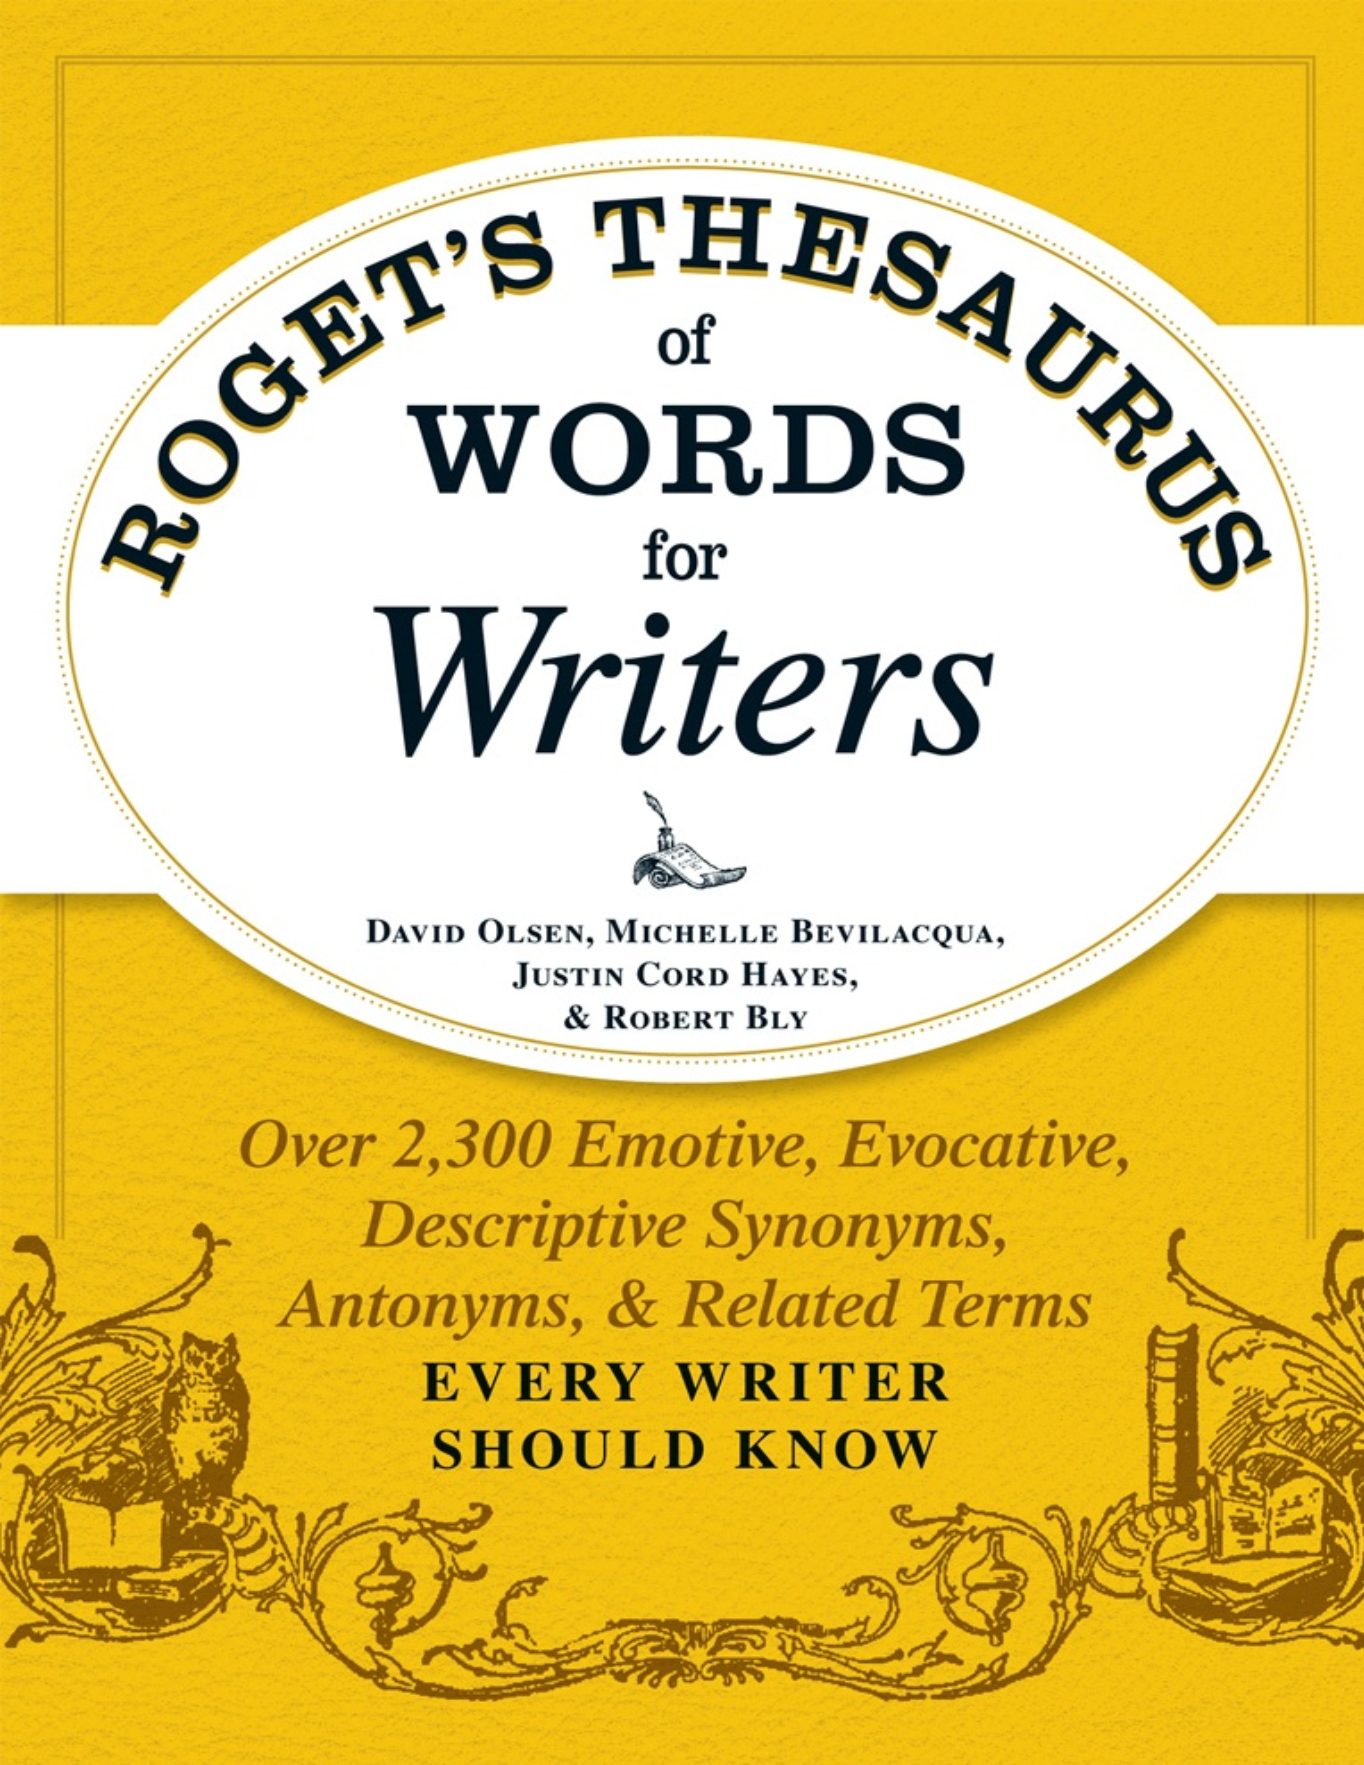 Rich Results on Google's SERP when searching for 'Roget's Thesaurus Of Words For Writers Book'